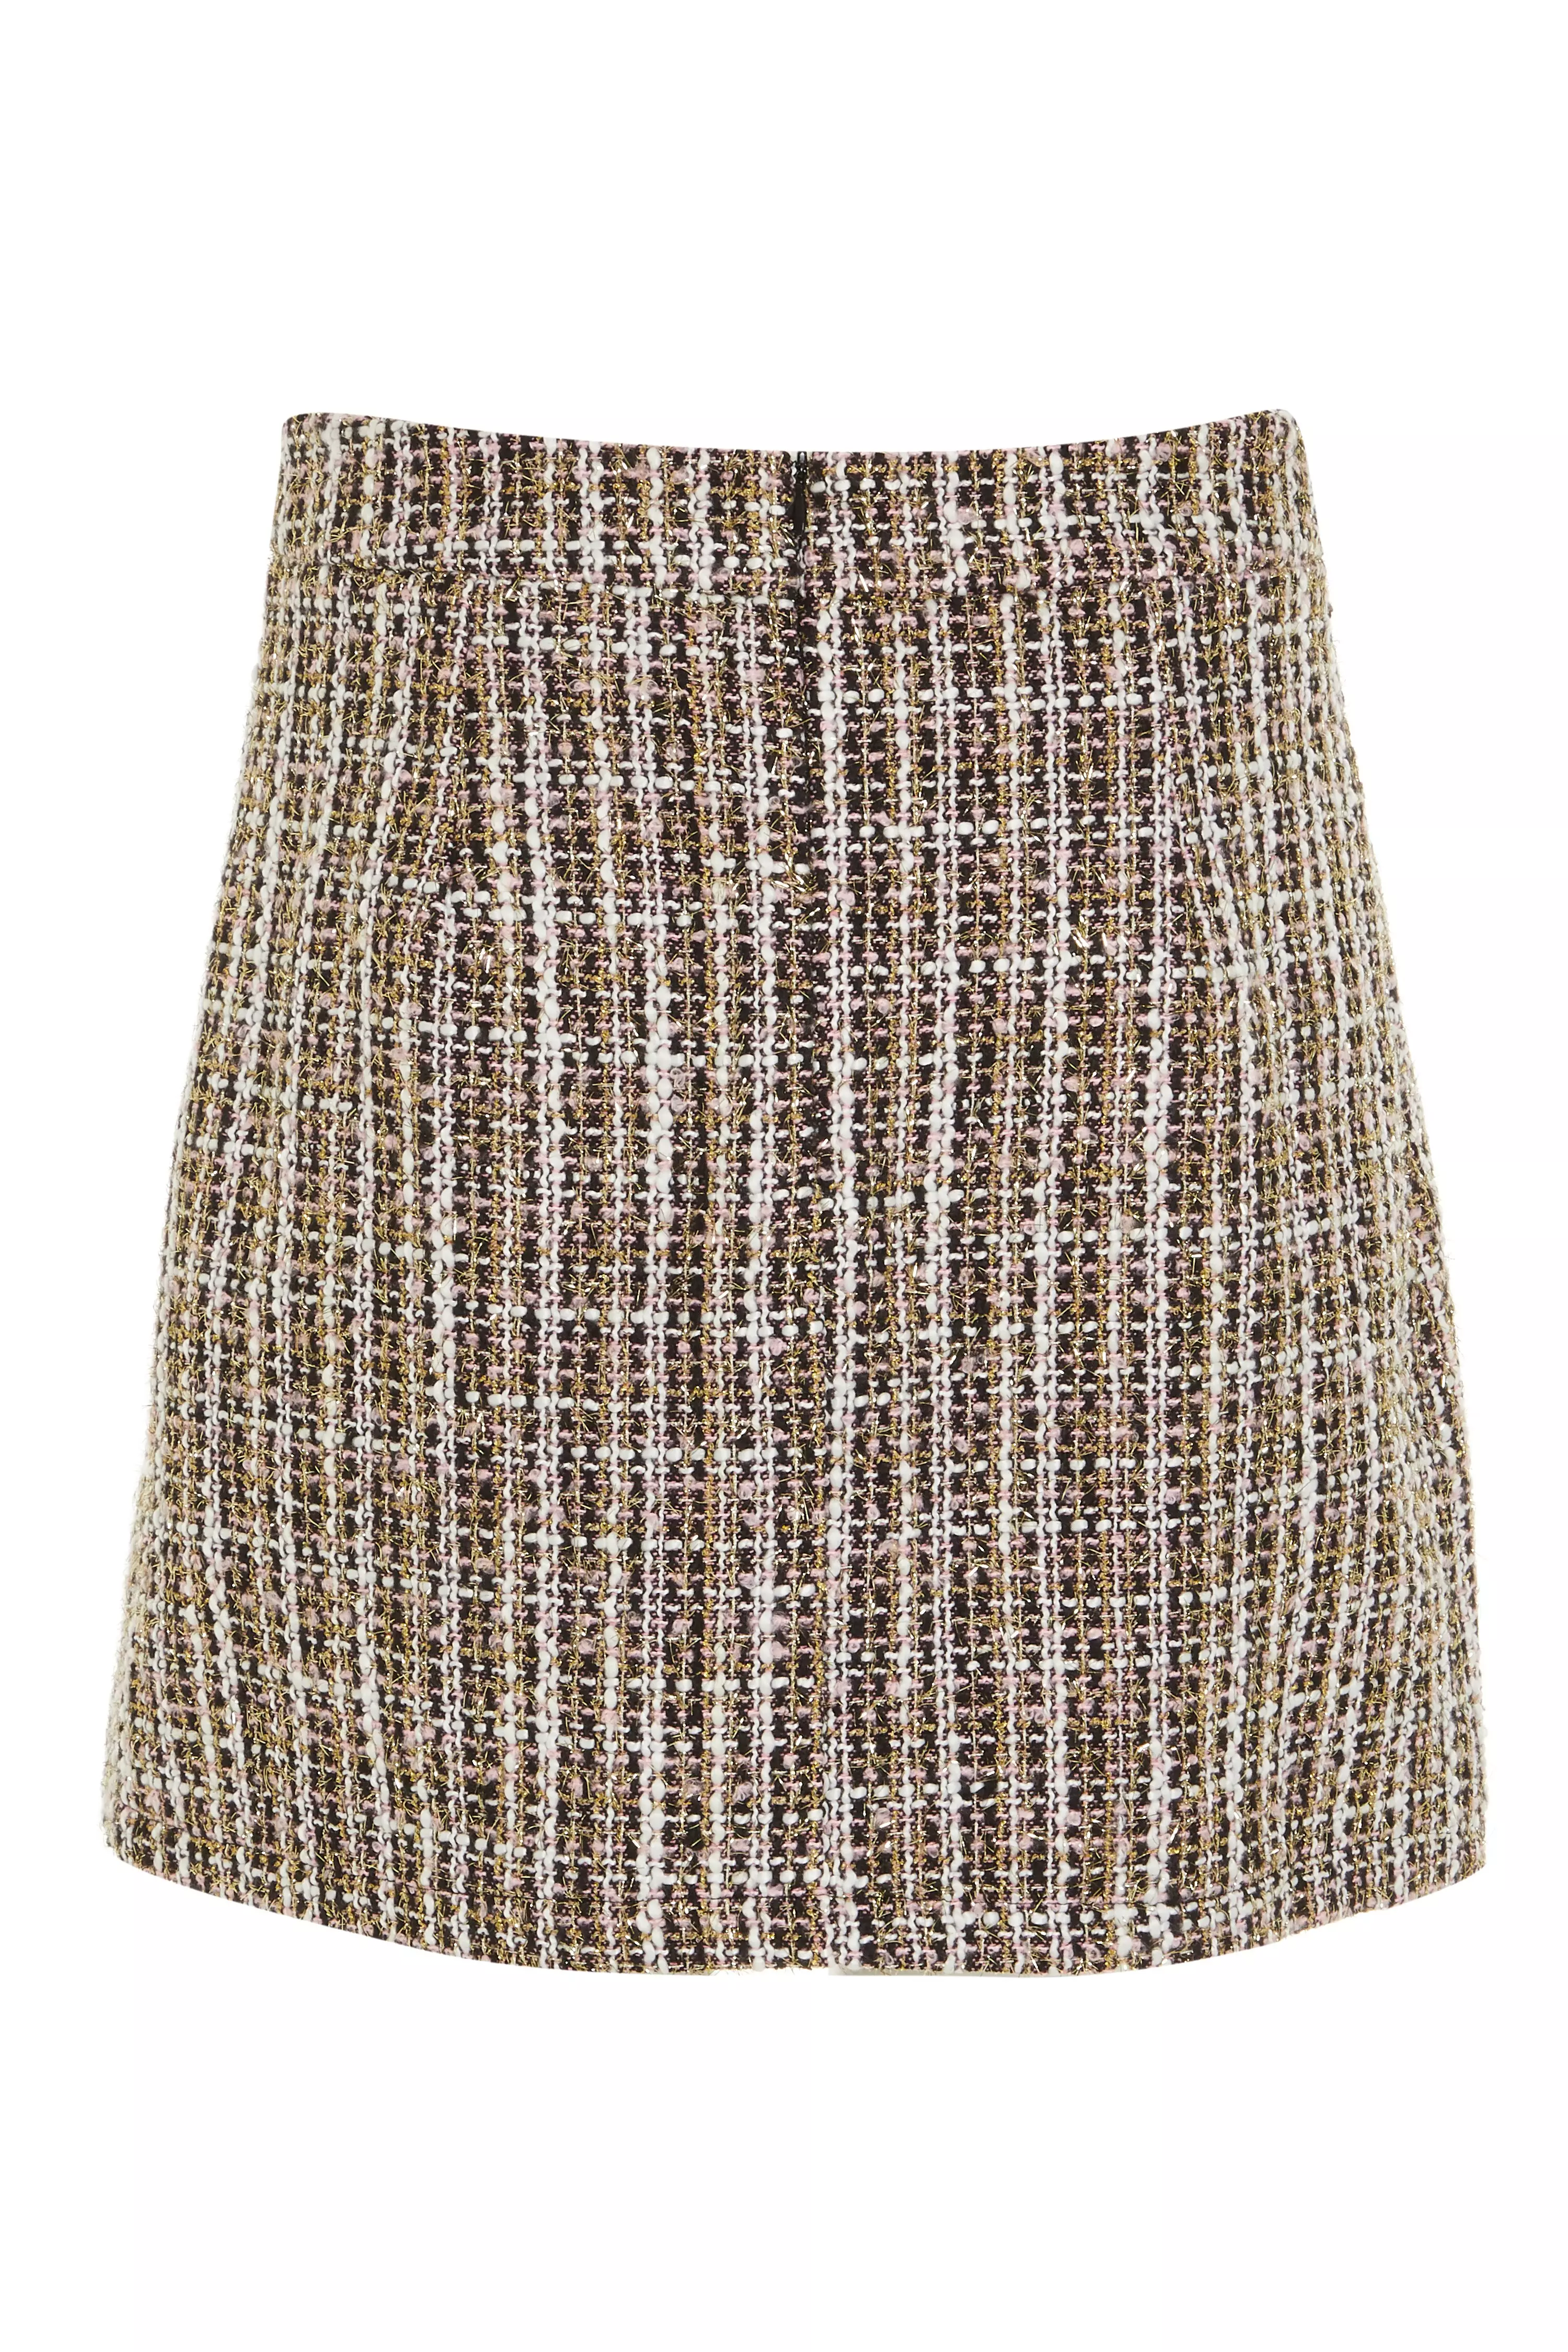 Multicoloured Check High Waist Tailored Skirt - QUIZ Clothing